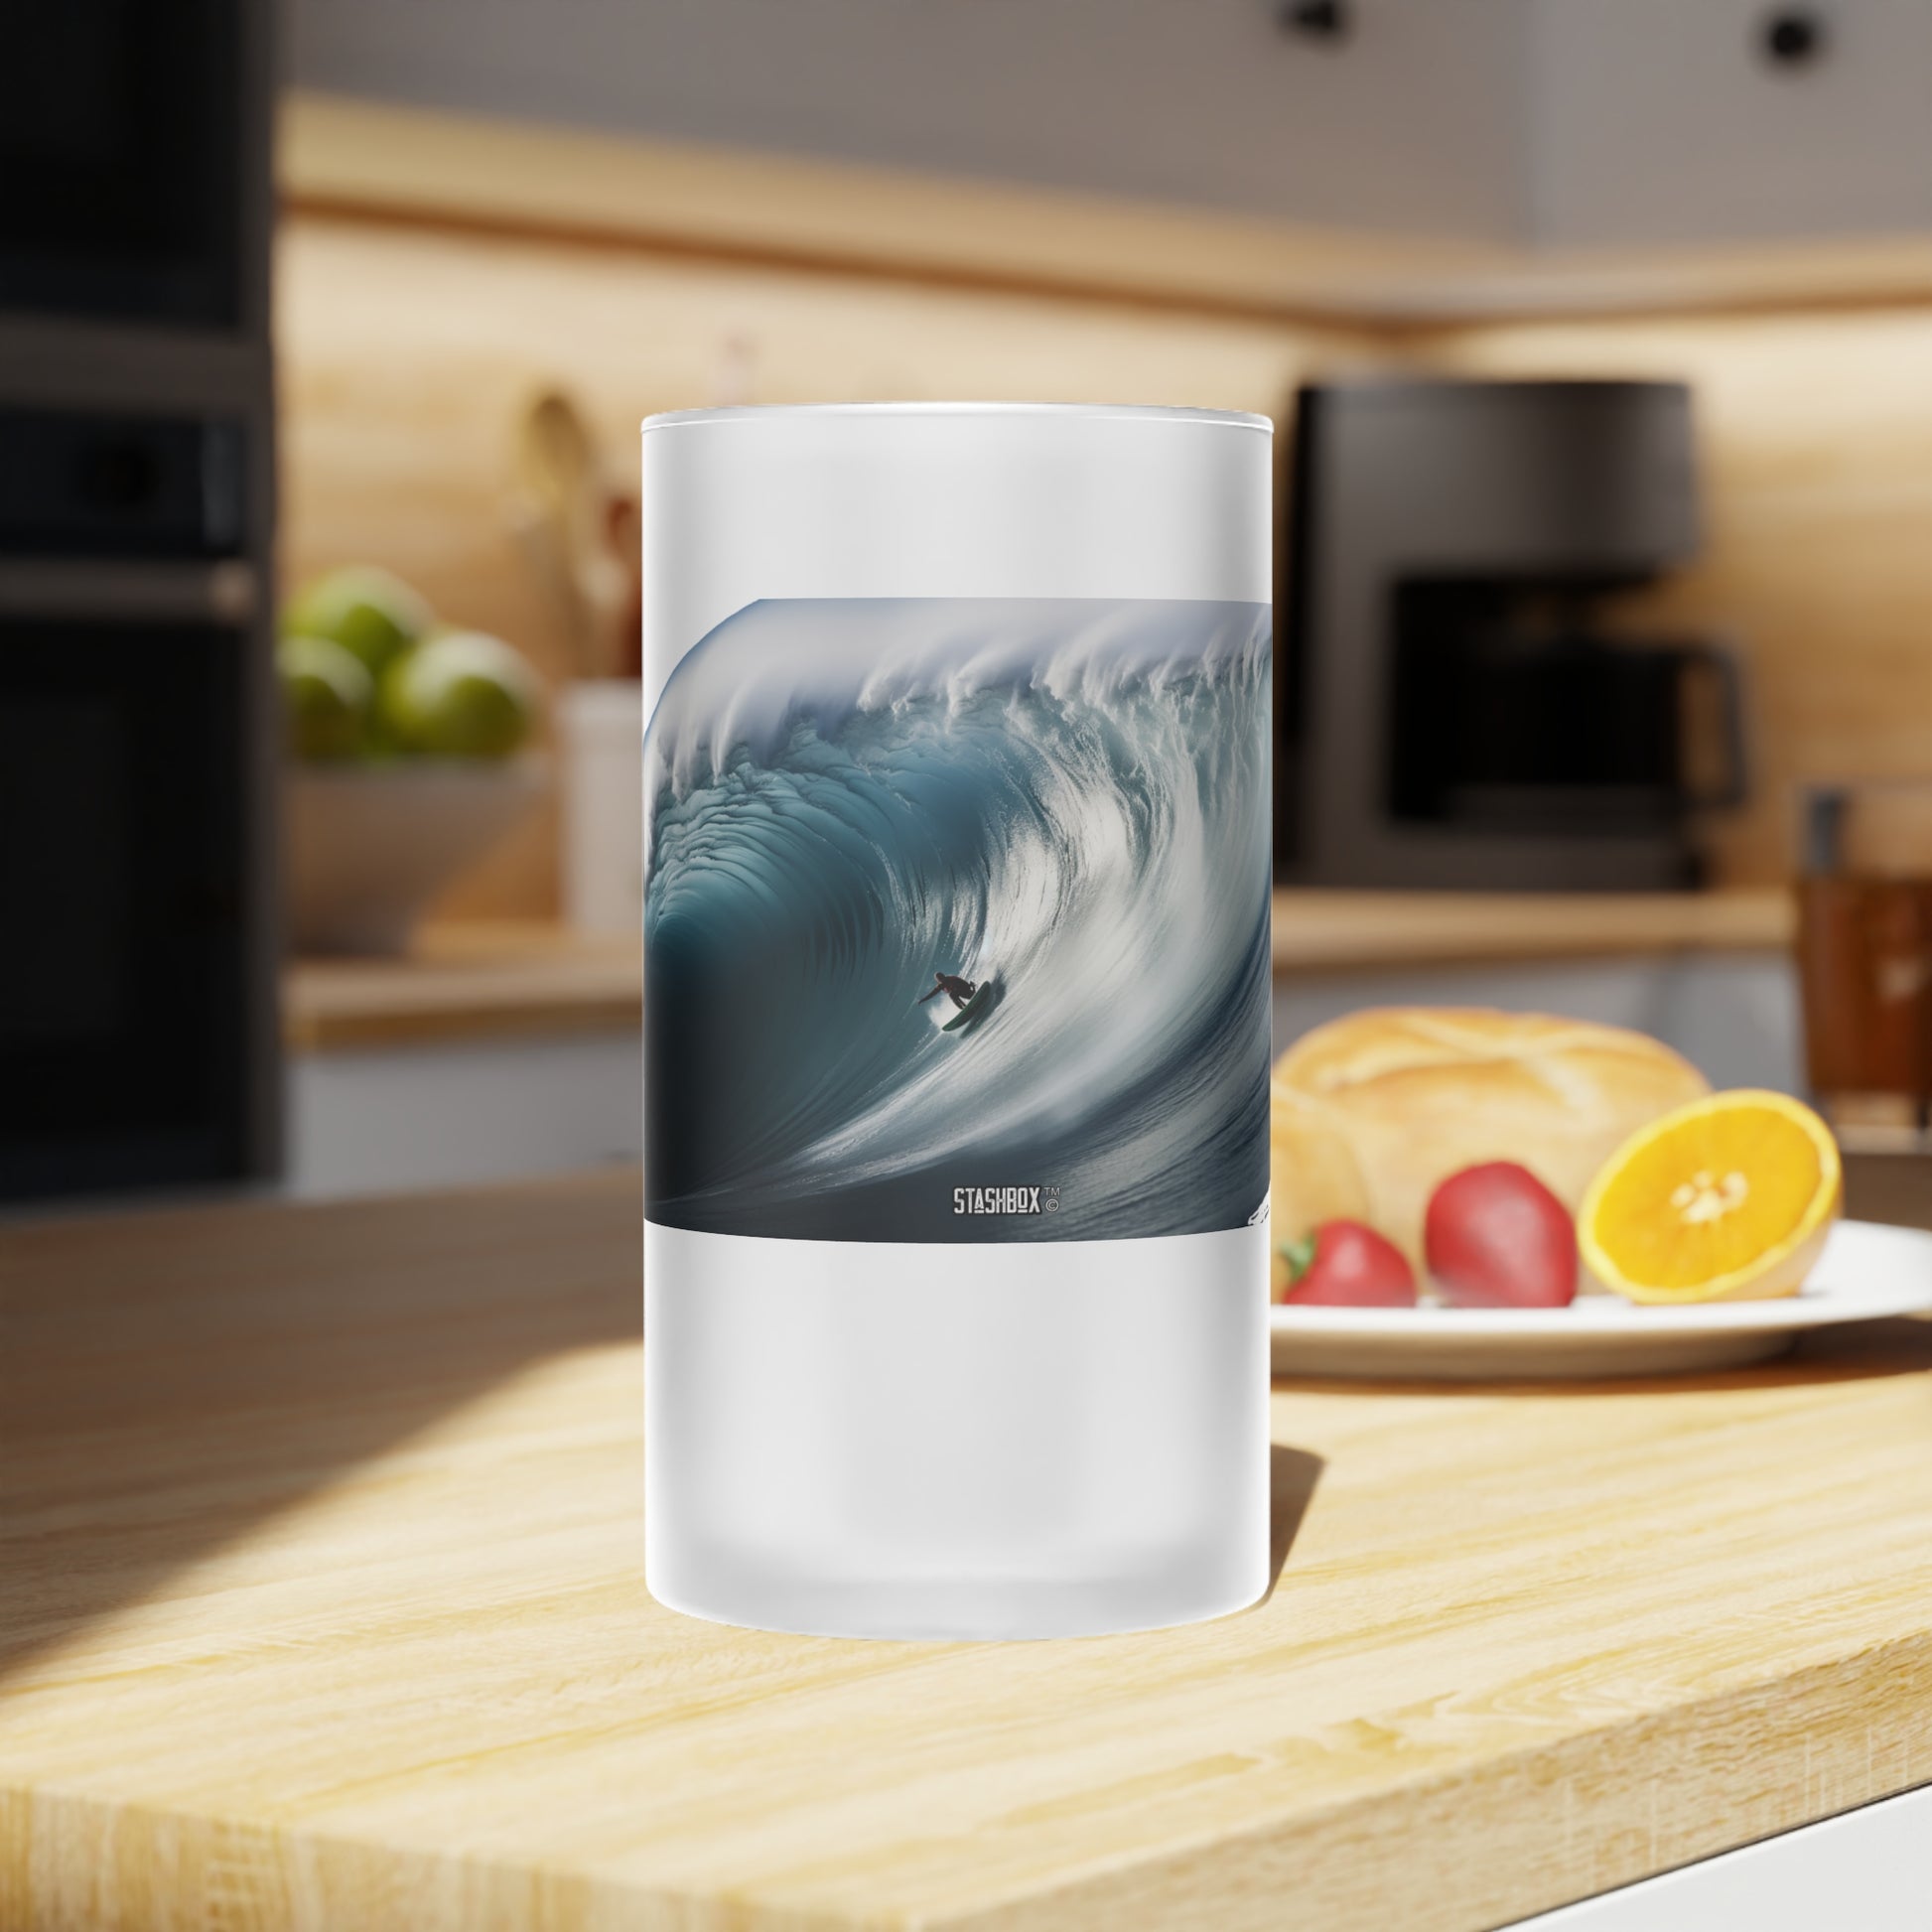 Surf's Up in Every Sip: Dive into the heart of the ocean with our Frosted Glass Beer Mug - Waves Design #061. Featuring a surfer conquering a monstrous 61-foot wave, this mug brings the adrenaline of the surf to your drinking experience. 🌊🍻 #SurfingSpirit #GiantWaveAdventure #StashboxMug